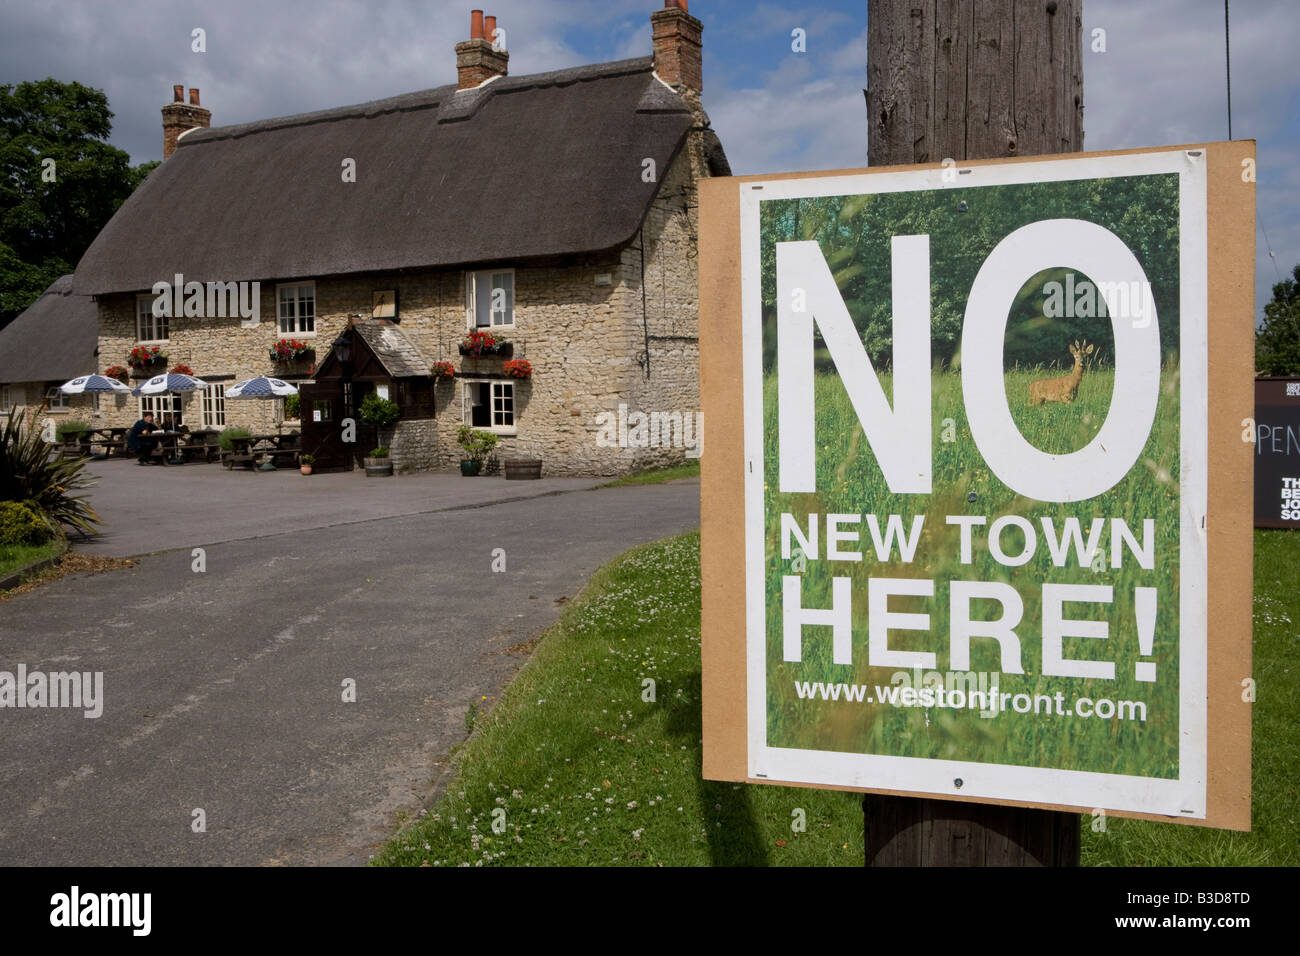 Residents display protest signs against the Weston On Otmoor eco town countering the Parkridge developments Eco town proposals Stock Photo